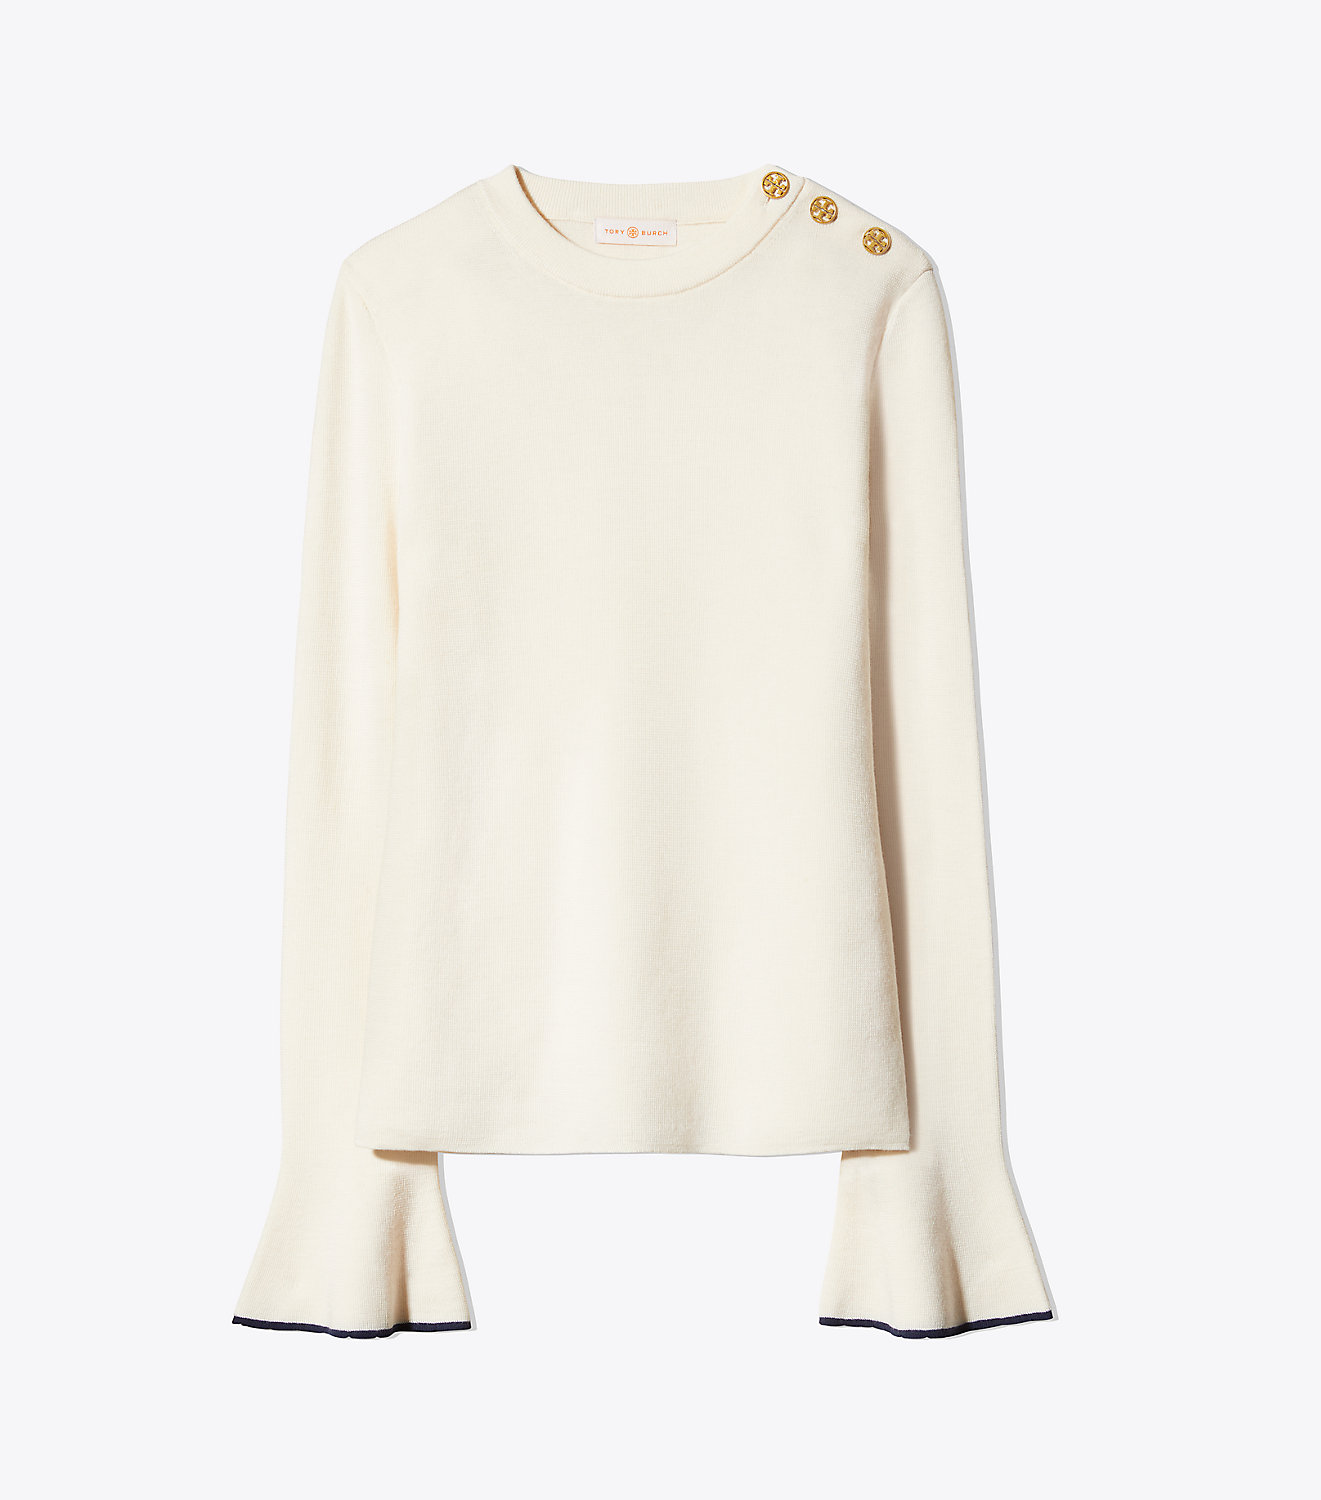 kimberly-sweater-tory-burch-feminine-knit-bell-sleeve-polished-gold-buttons -wool-katie-considers-blog-the-daily-hunt